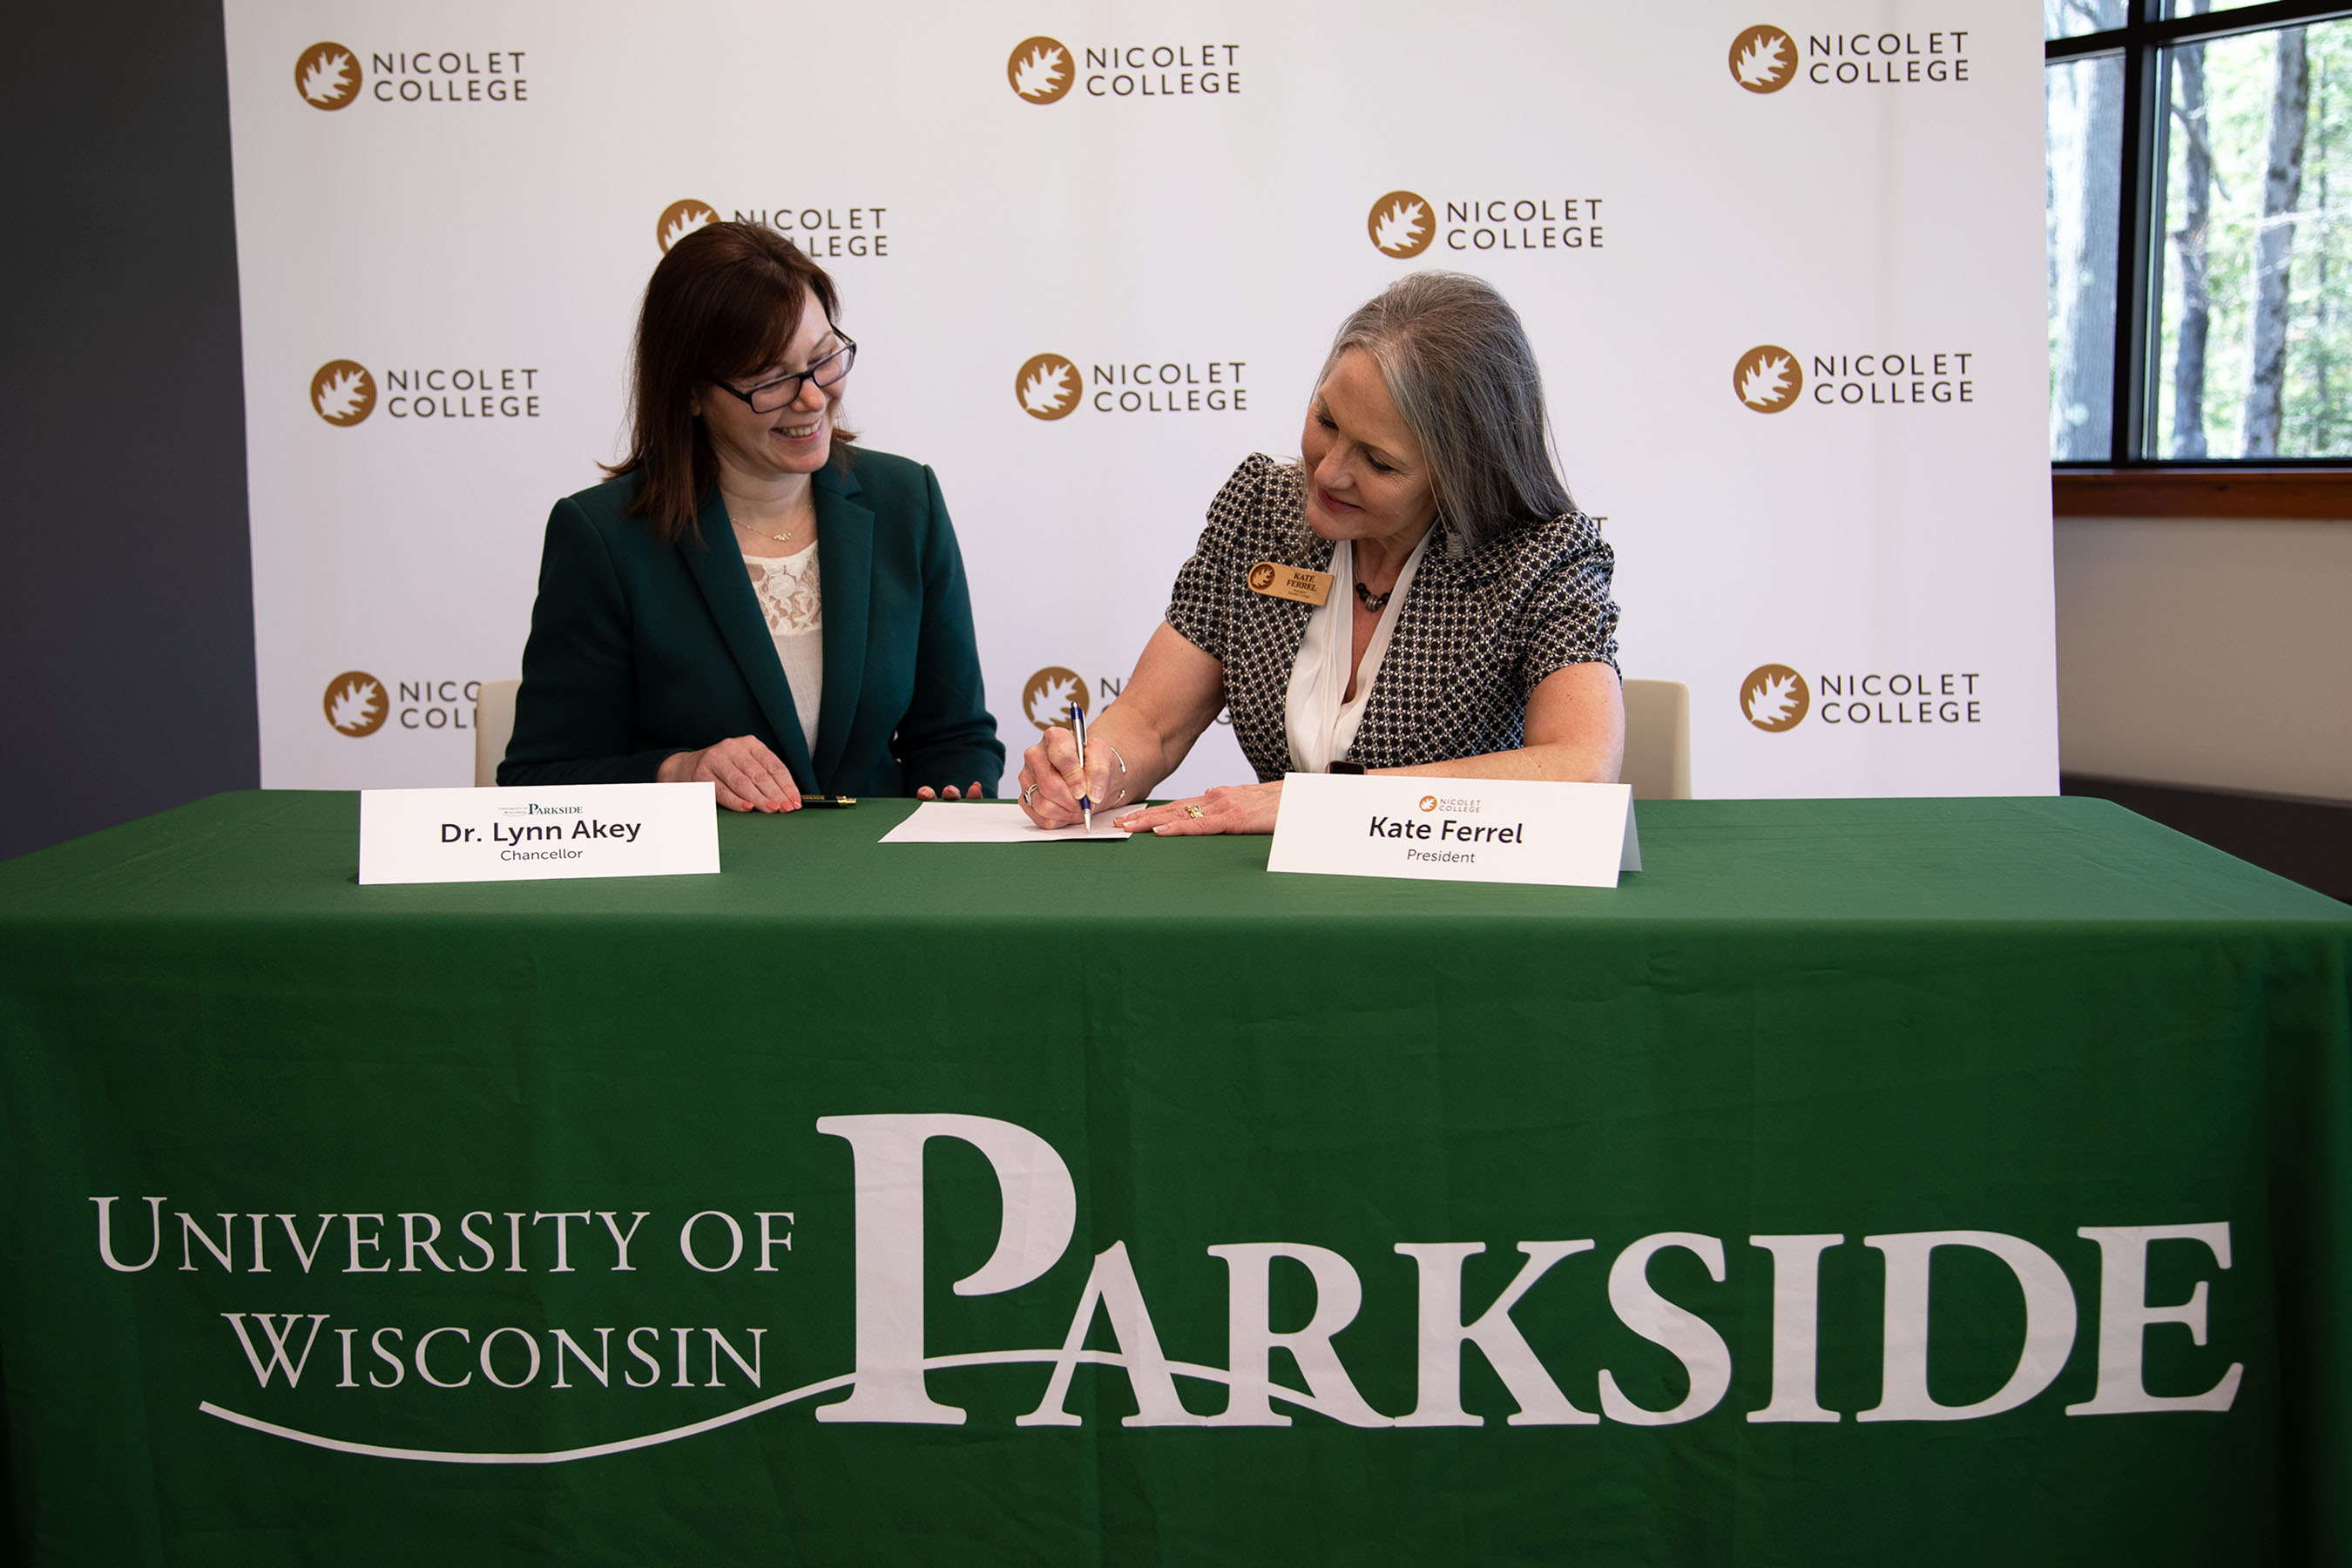 Chancellor Akey and President Ferrel sign the agreements